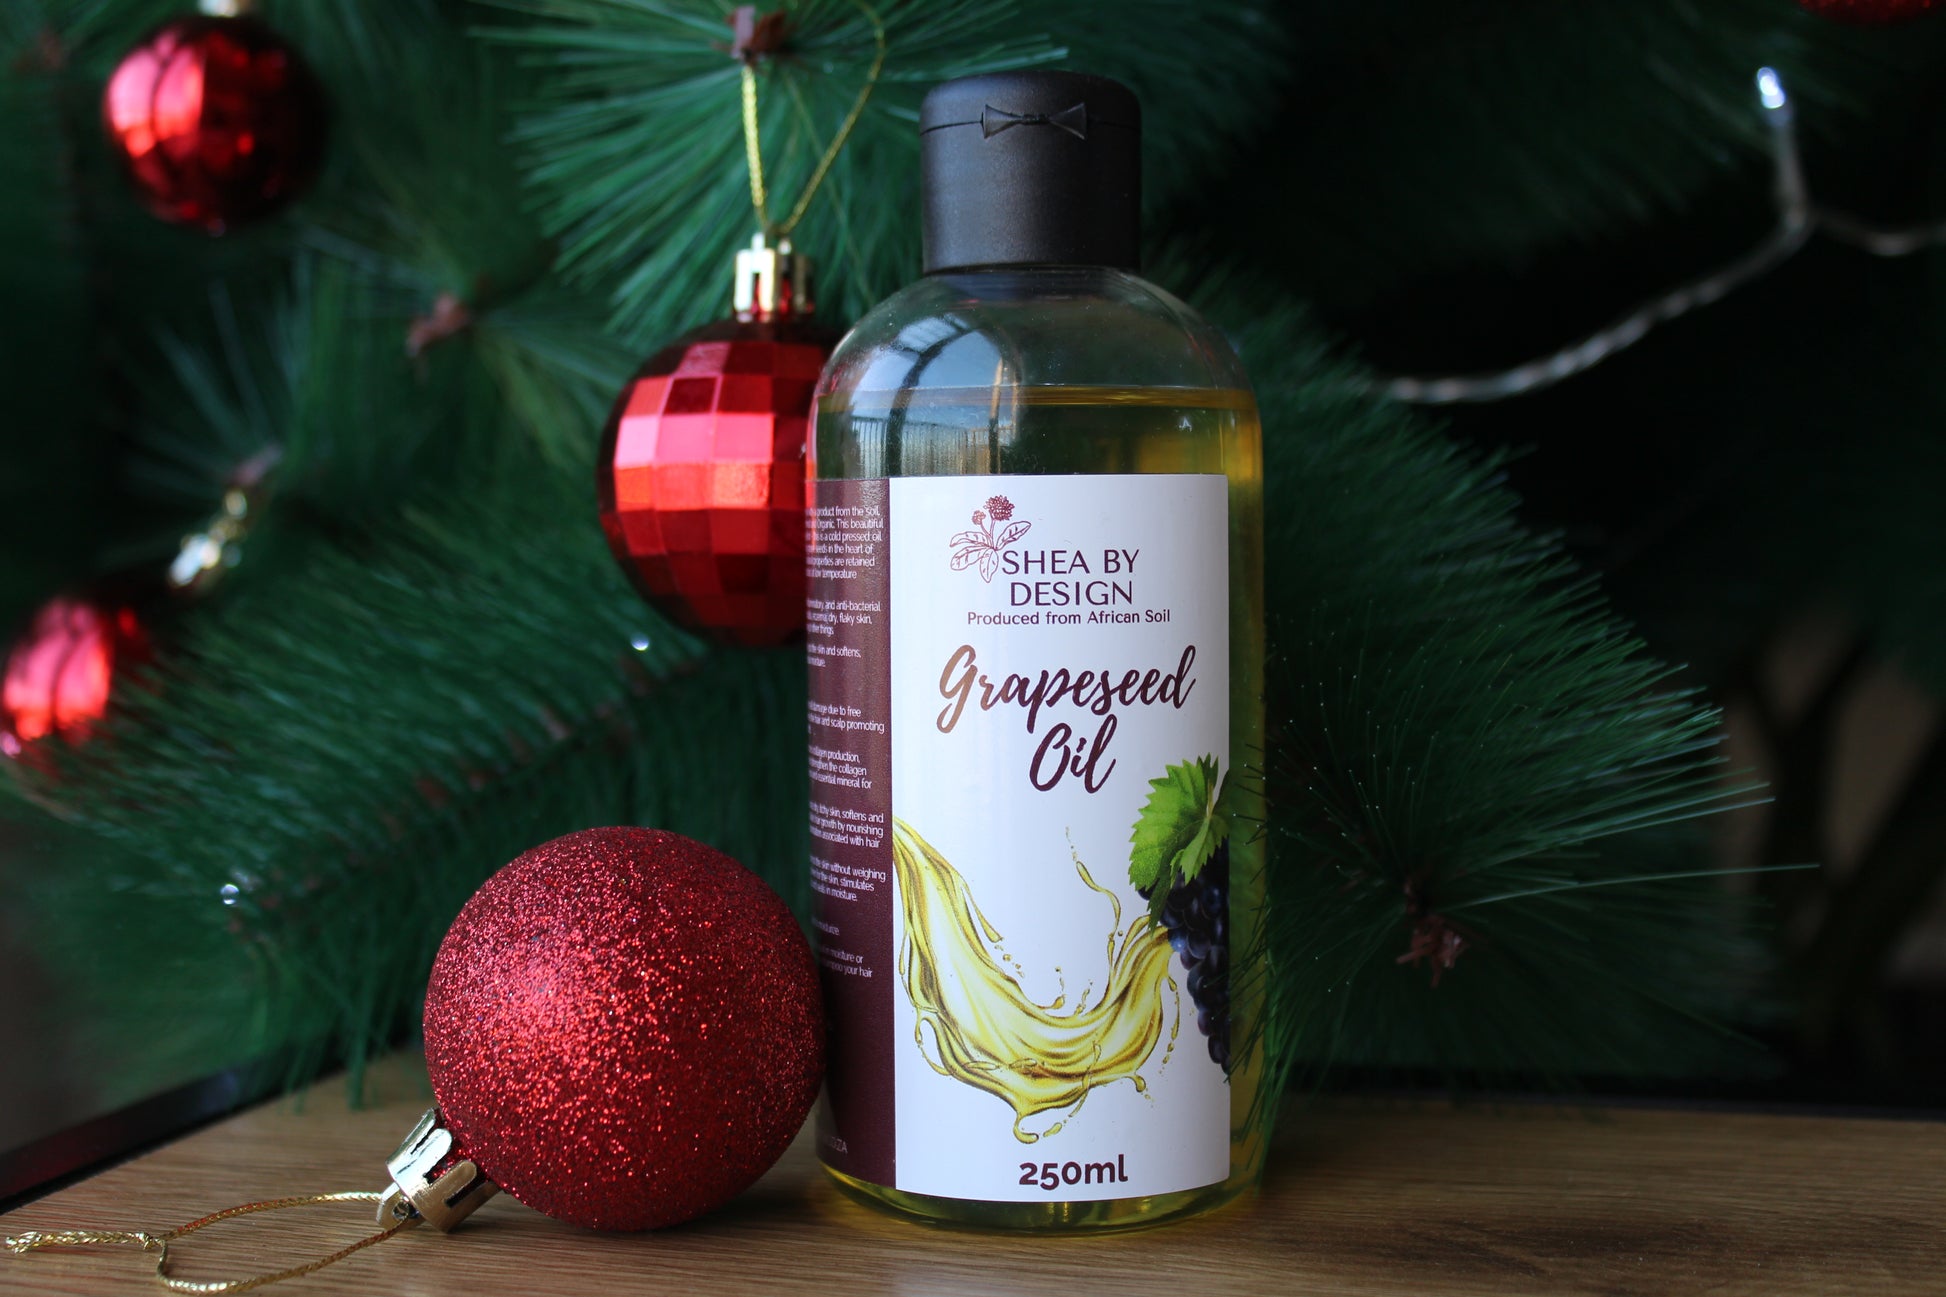 Grapeseed Oil (250ml) - Shea by Design